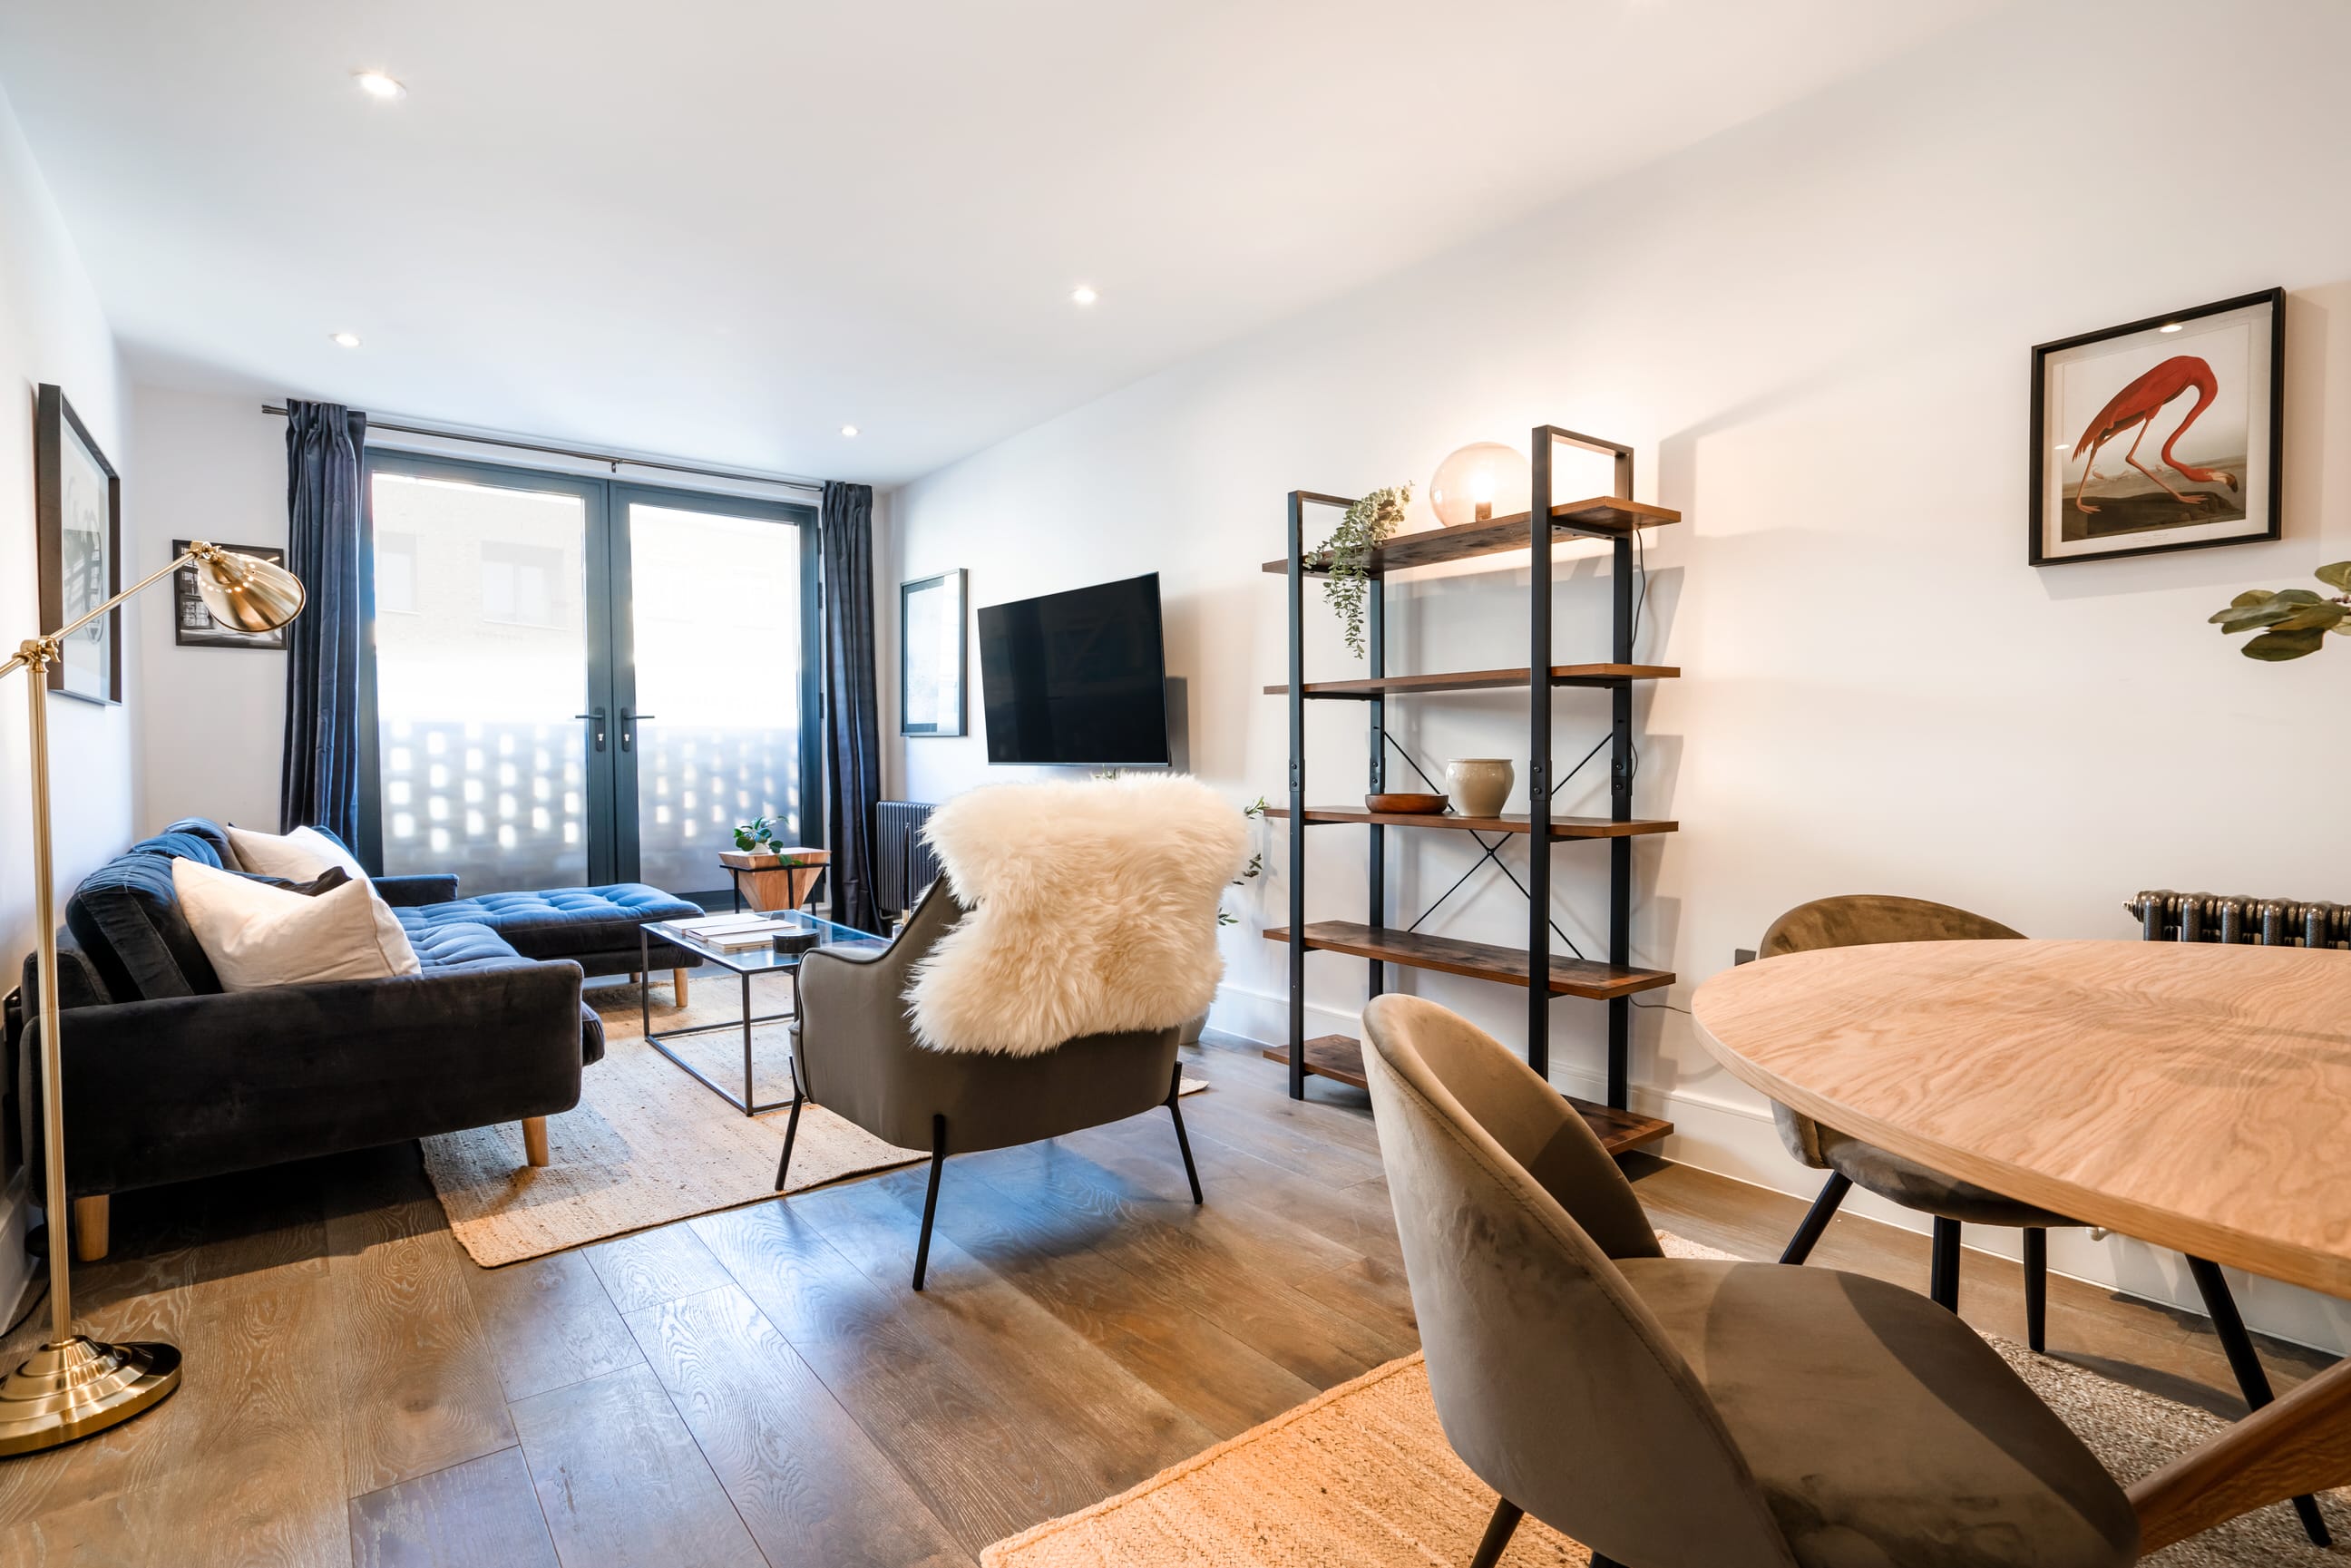 Property Image 1 - Impressive Modern Apartment close to King’s Cross